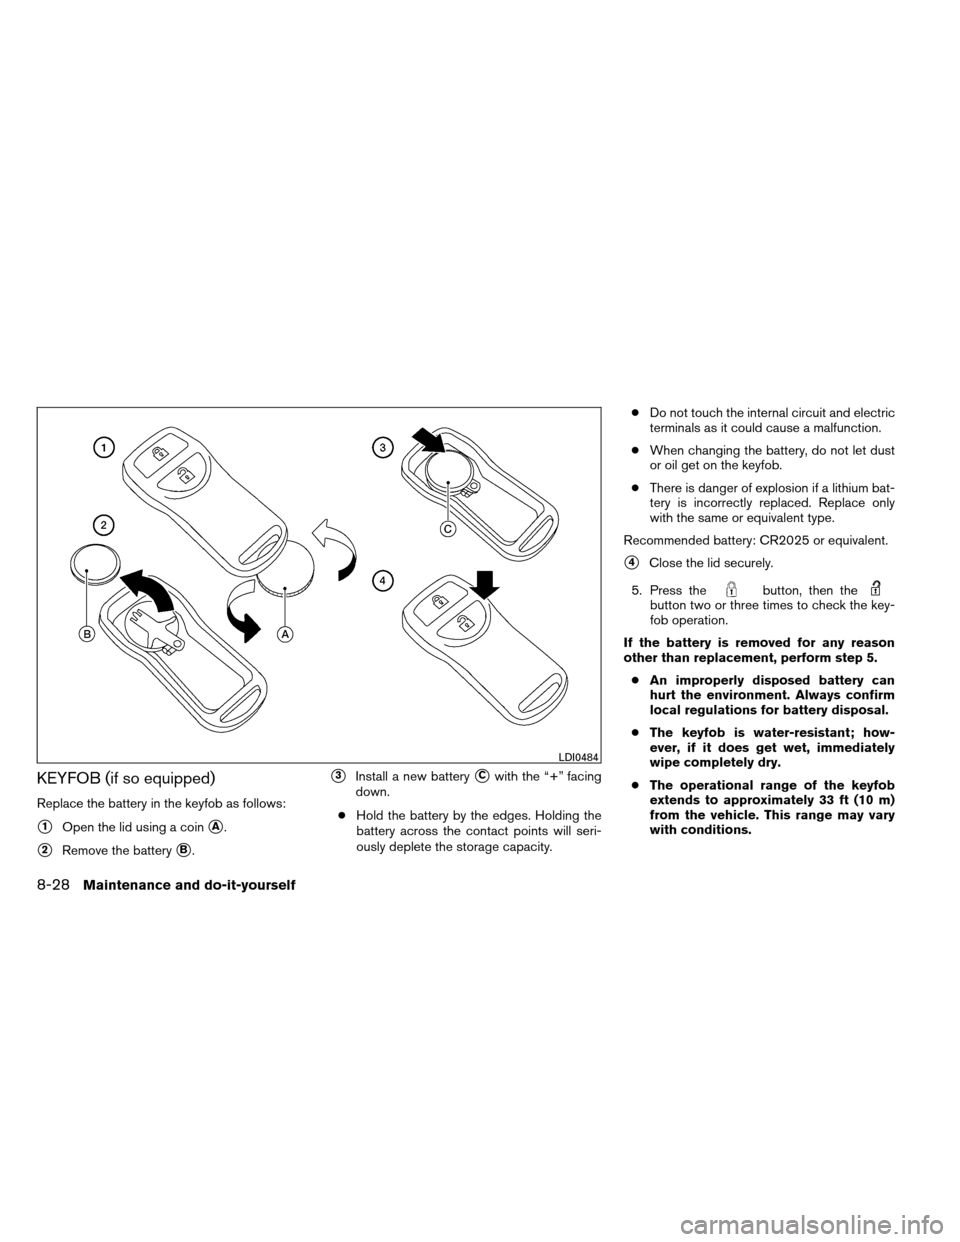 NISSAN ARMADA 2013 1.G Owners Manual KEYFOB (if so equipped)
Replace the battery in the keyfob as follows:
1Open the lid using a coinA.
2Remove the batteryB.
3Install a new batteryCwith the “+” facing
down.
● Hold the battery